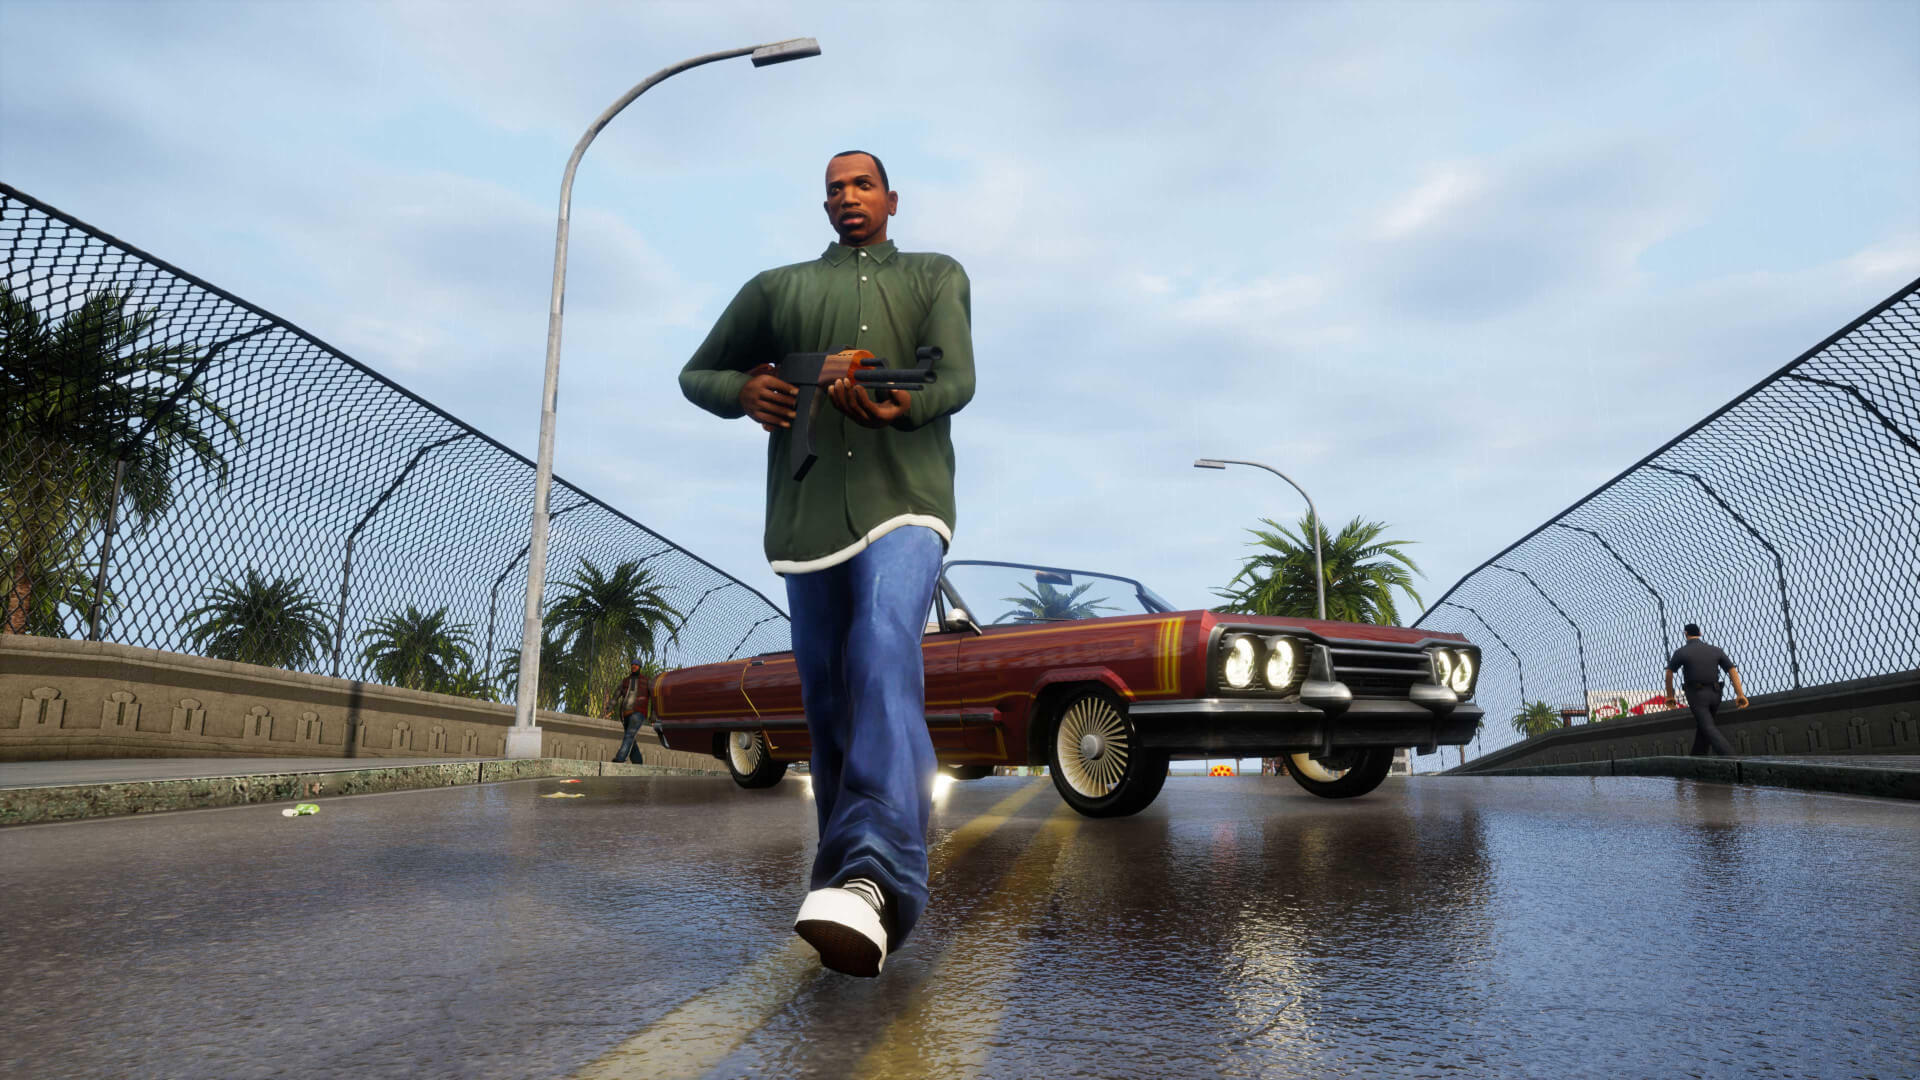 CJ walking away from a car wielding a shotgun in the GTA Trilogy Definitive Edition version of San Andreas